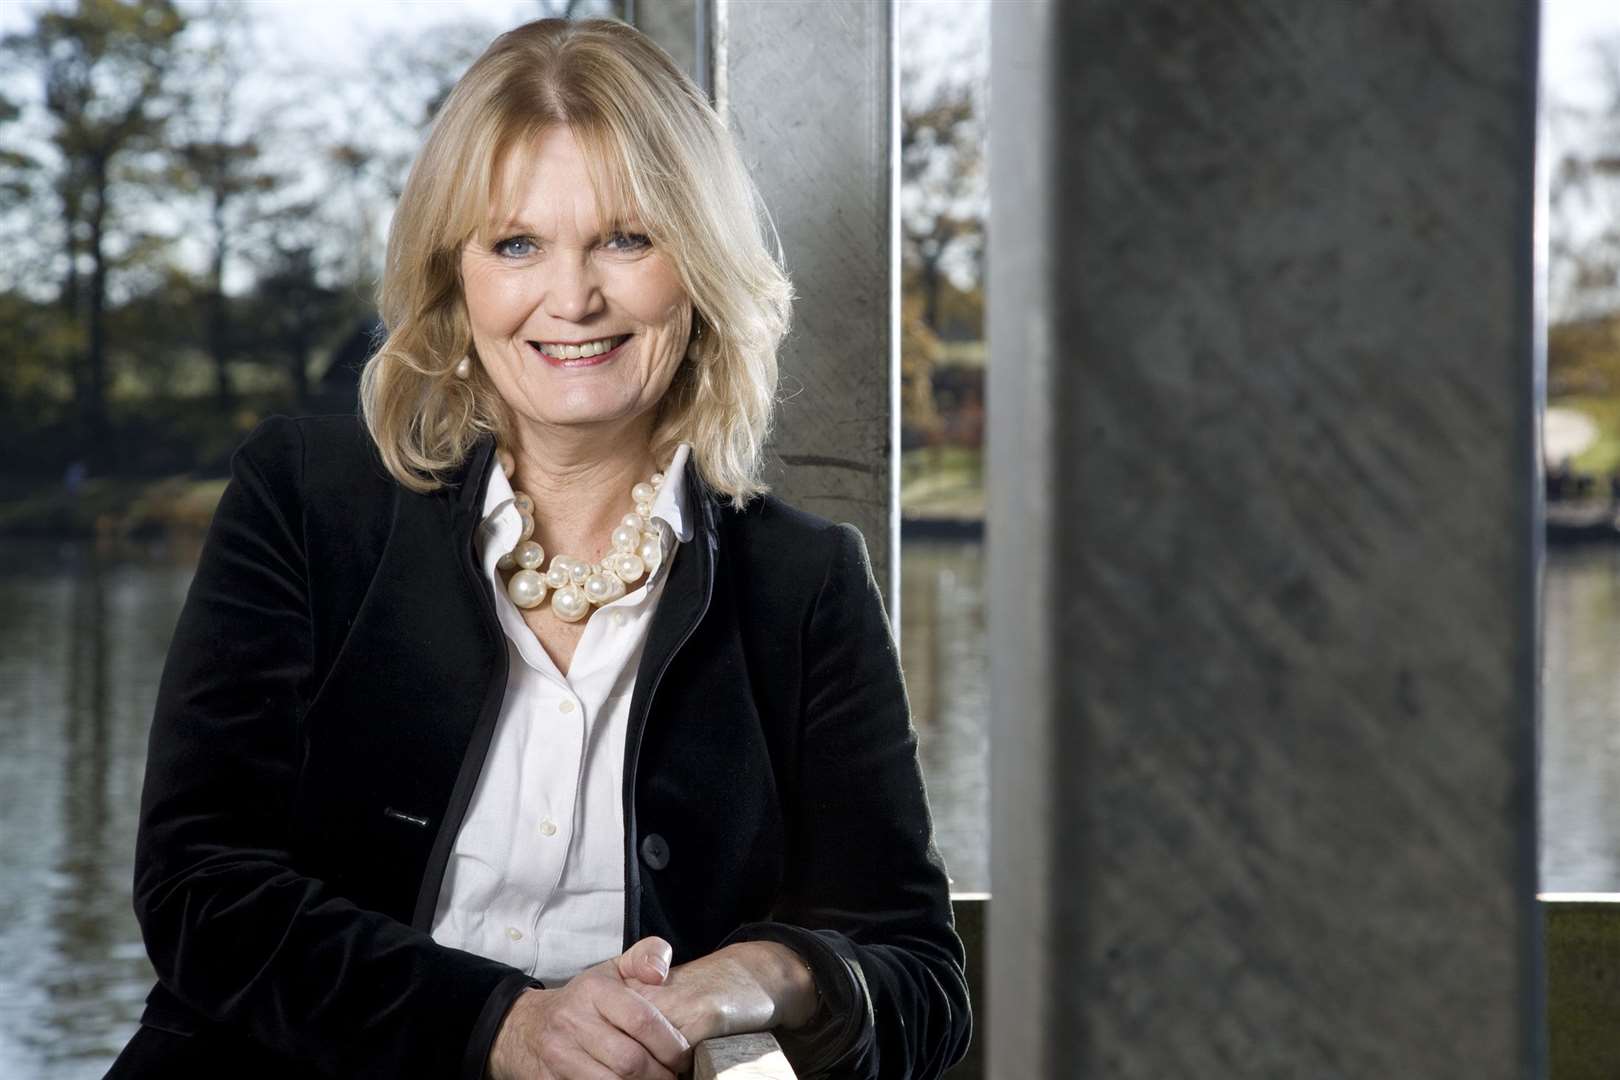 Alison Hardy has retired after 25 years from PR firm Maxim